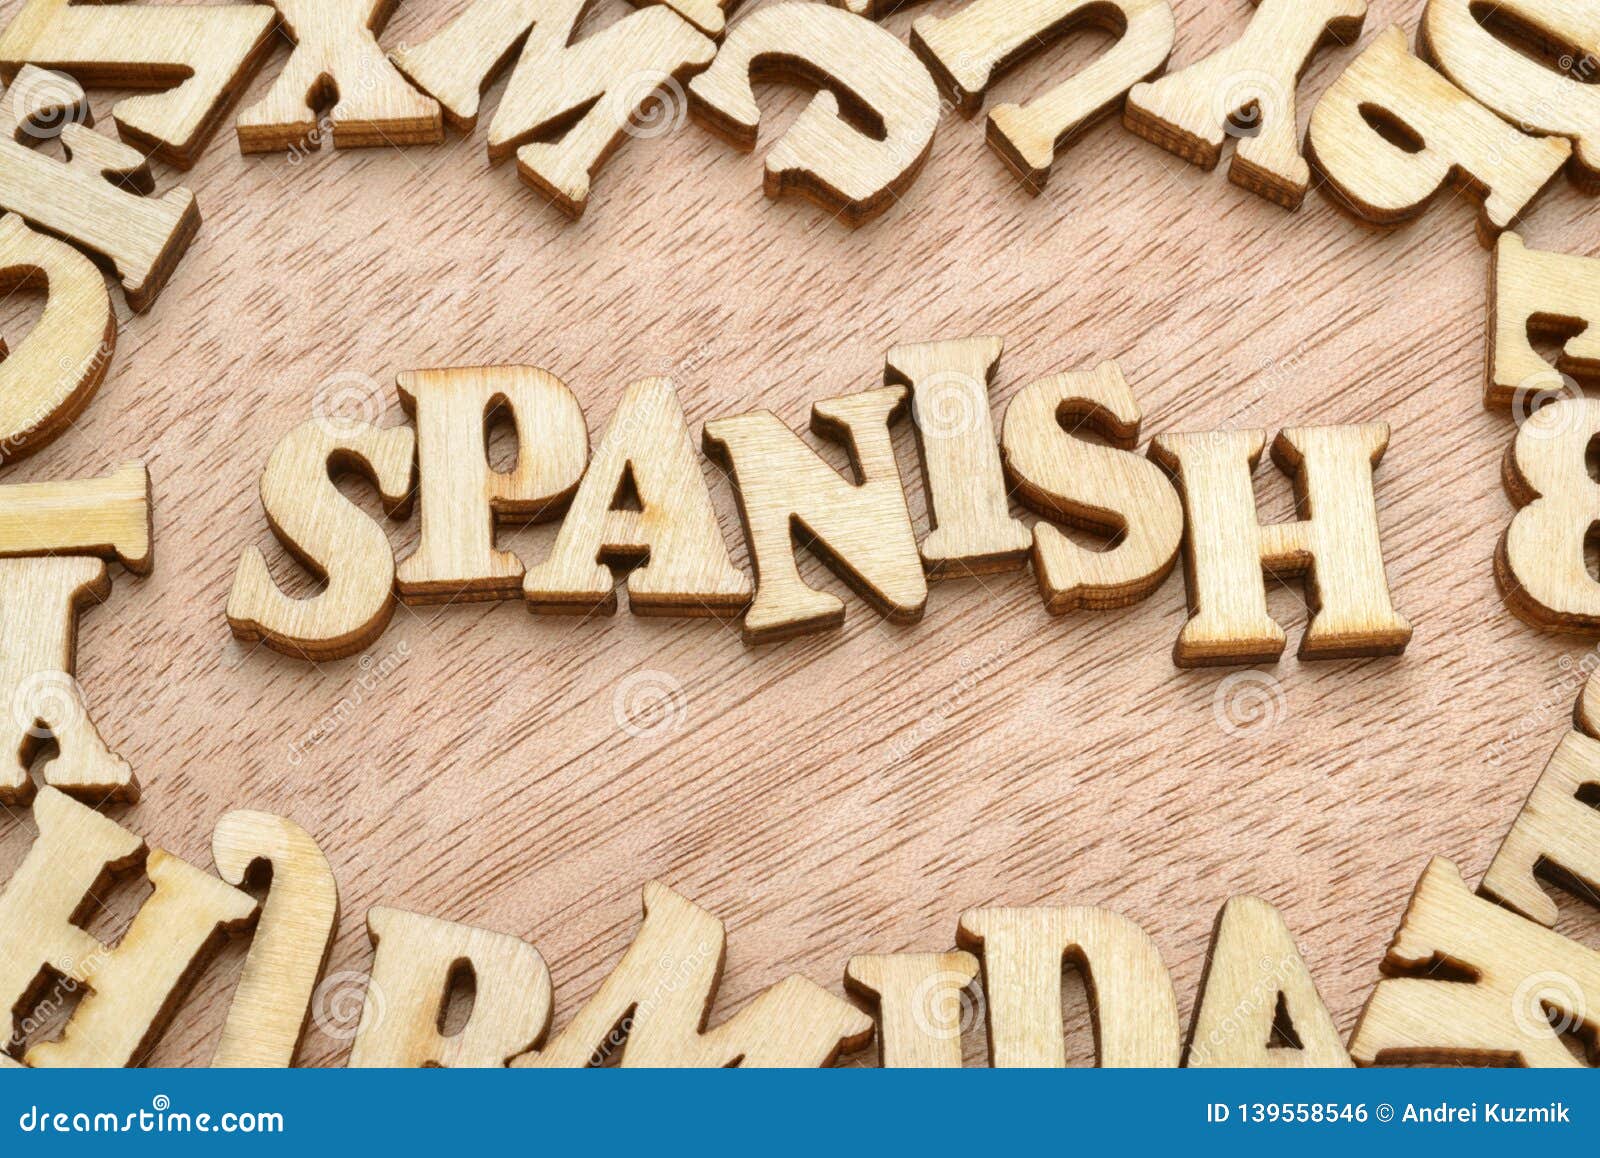 what is the spanish word for assignment